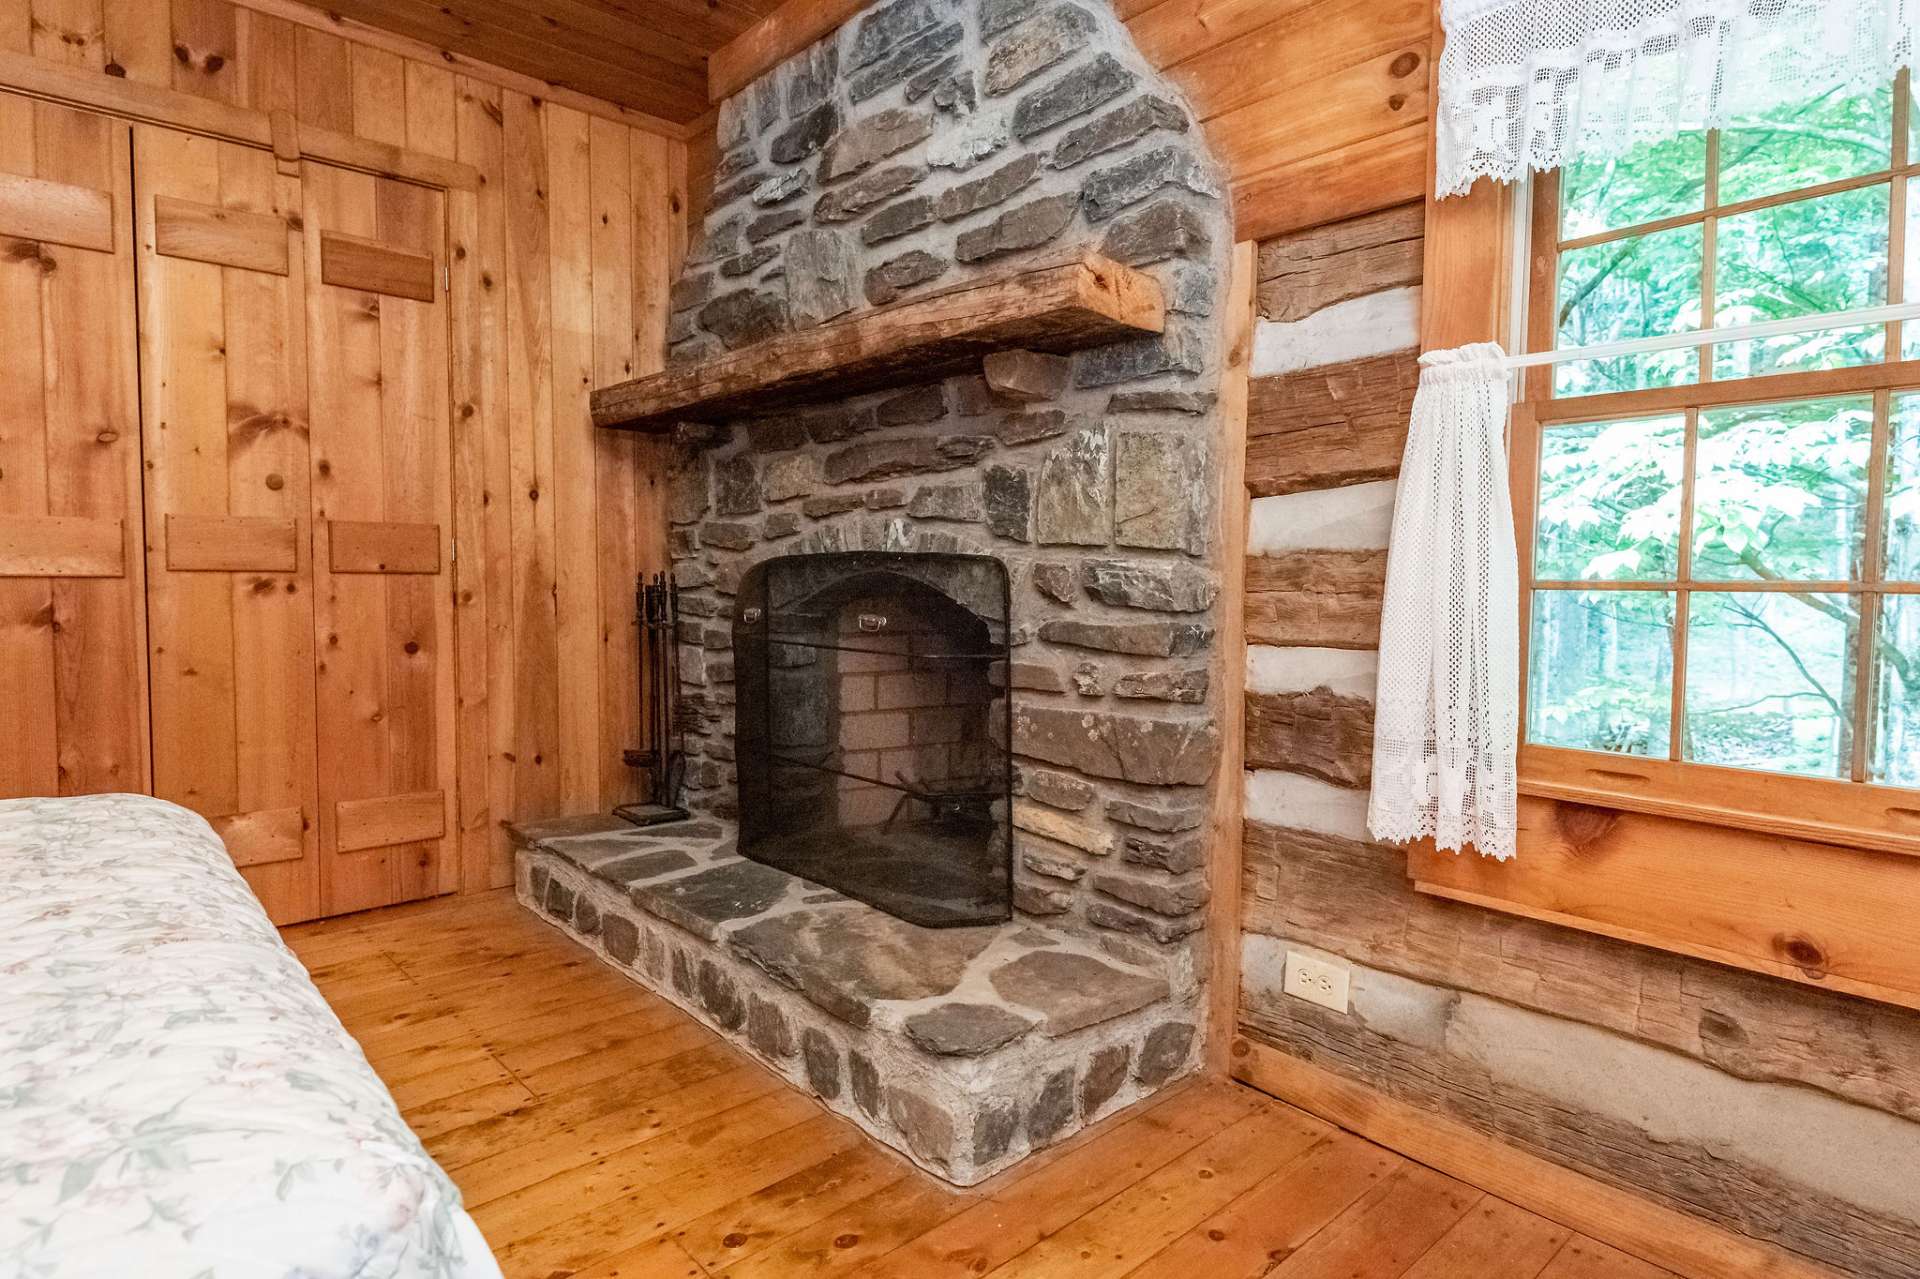 Fireplace, view of the creek, and spacious closets will persuade your guests to stay longer.